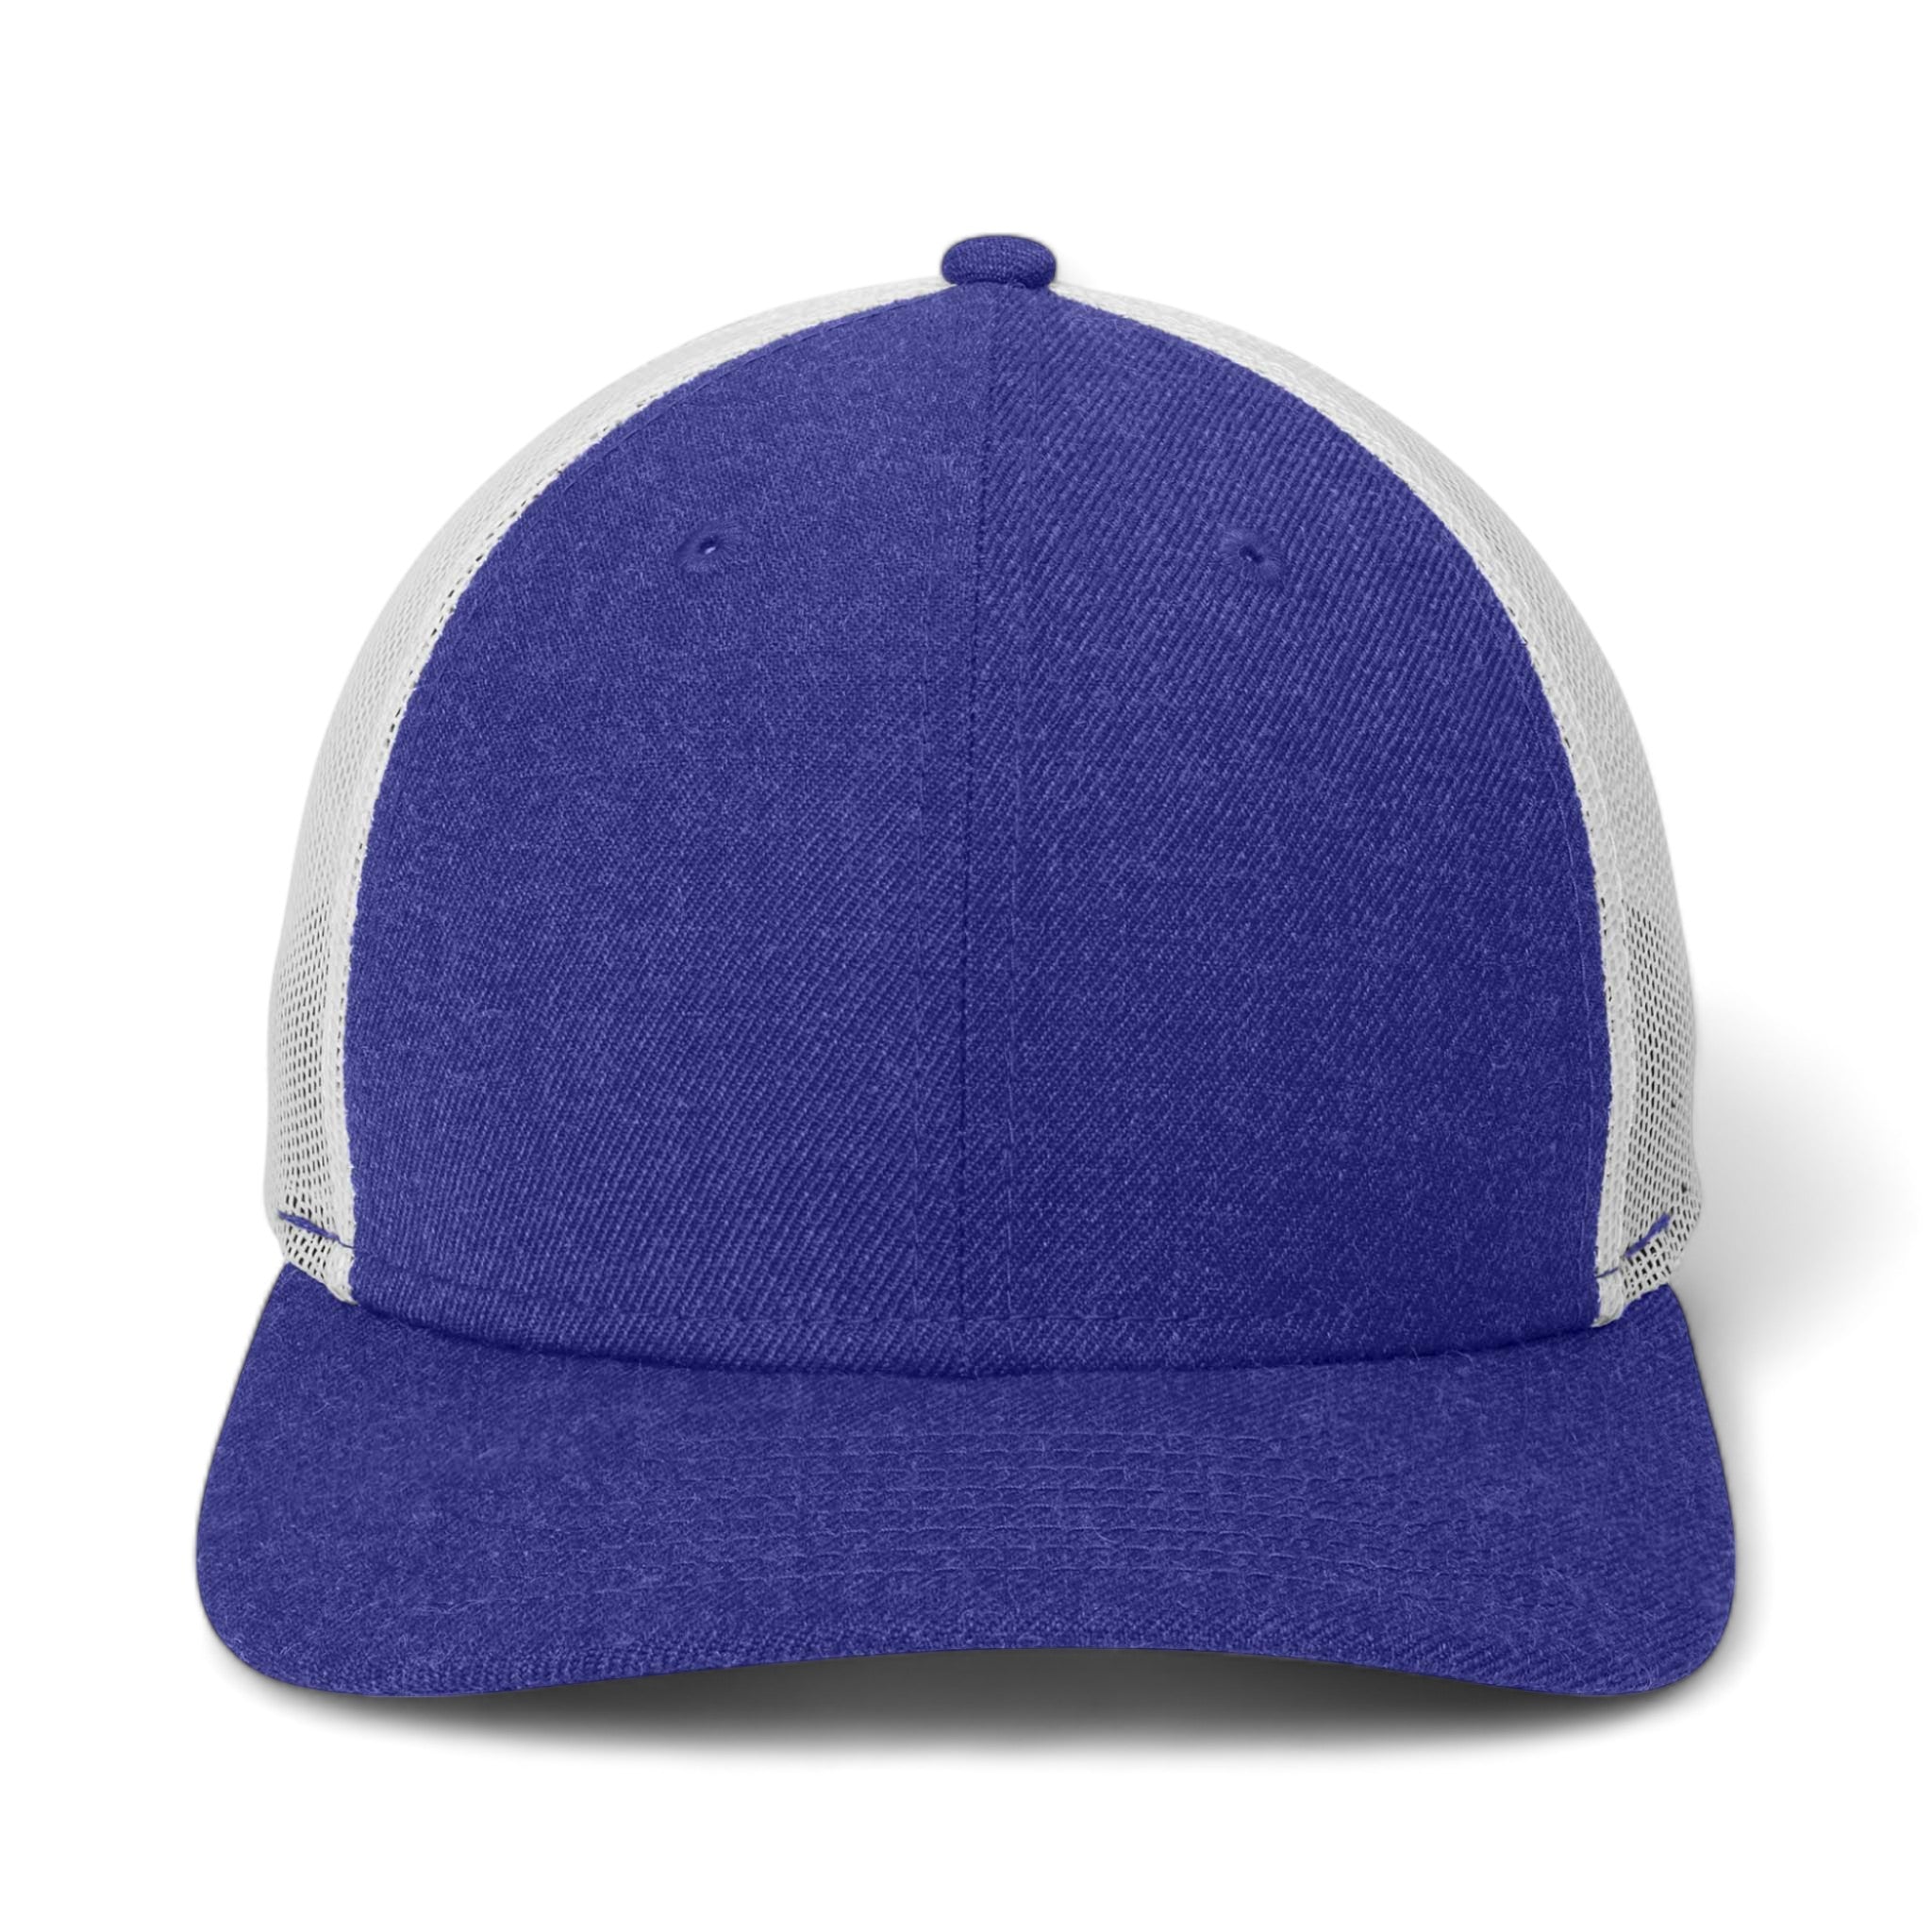 Front view of New Era NE207 custom hat in heather royal and white